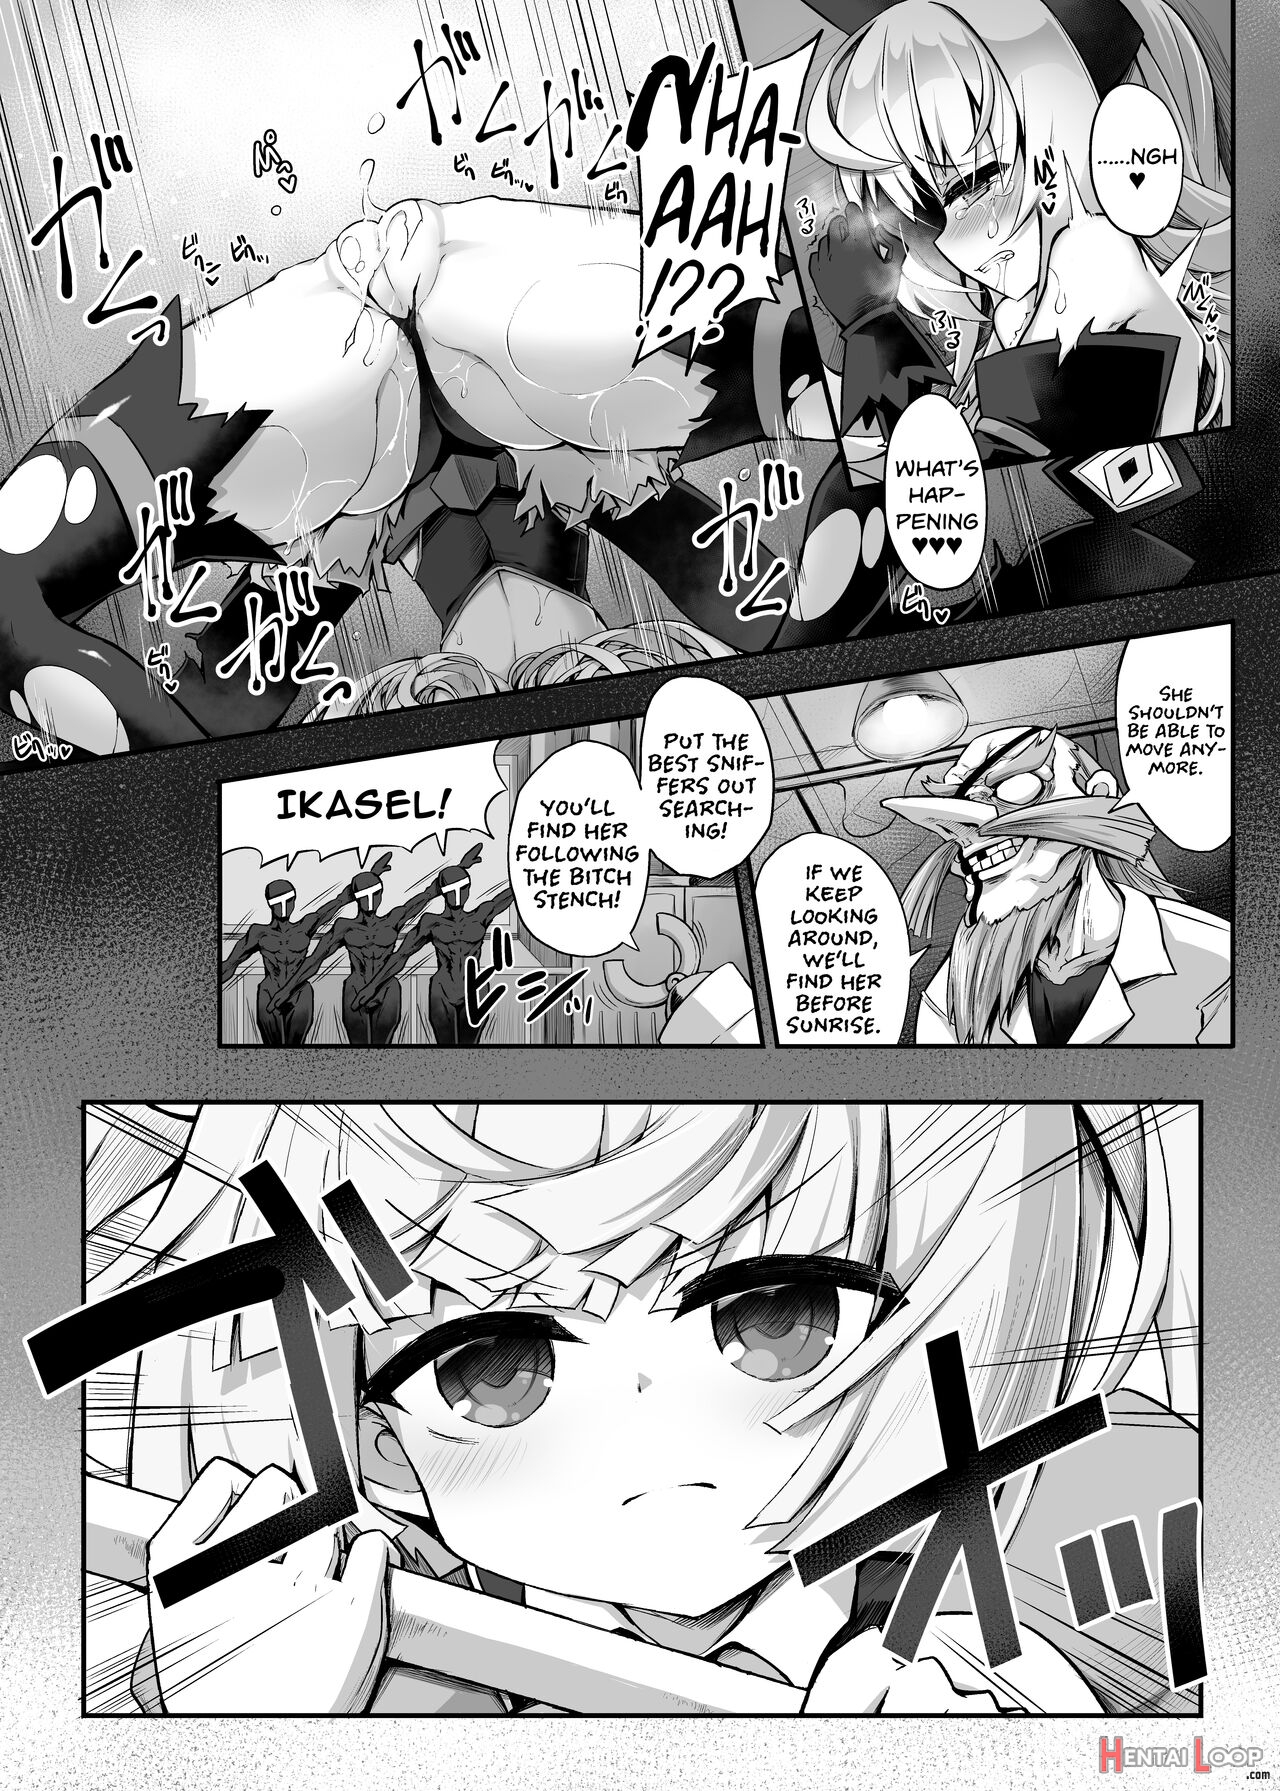 Masochist Cat X Magic Girl ~a Manga In Which The Evil Magical Girl Is Put On A Leash And Domesticated By The Good Magical Girl~ page 7